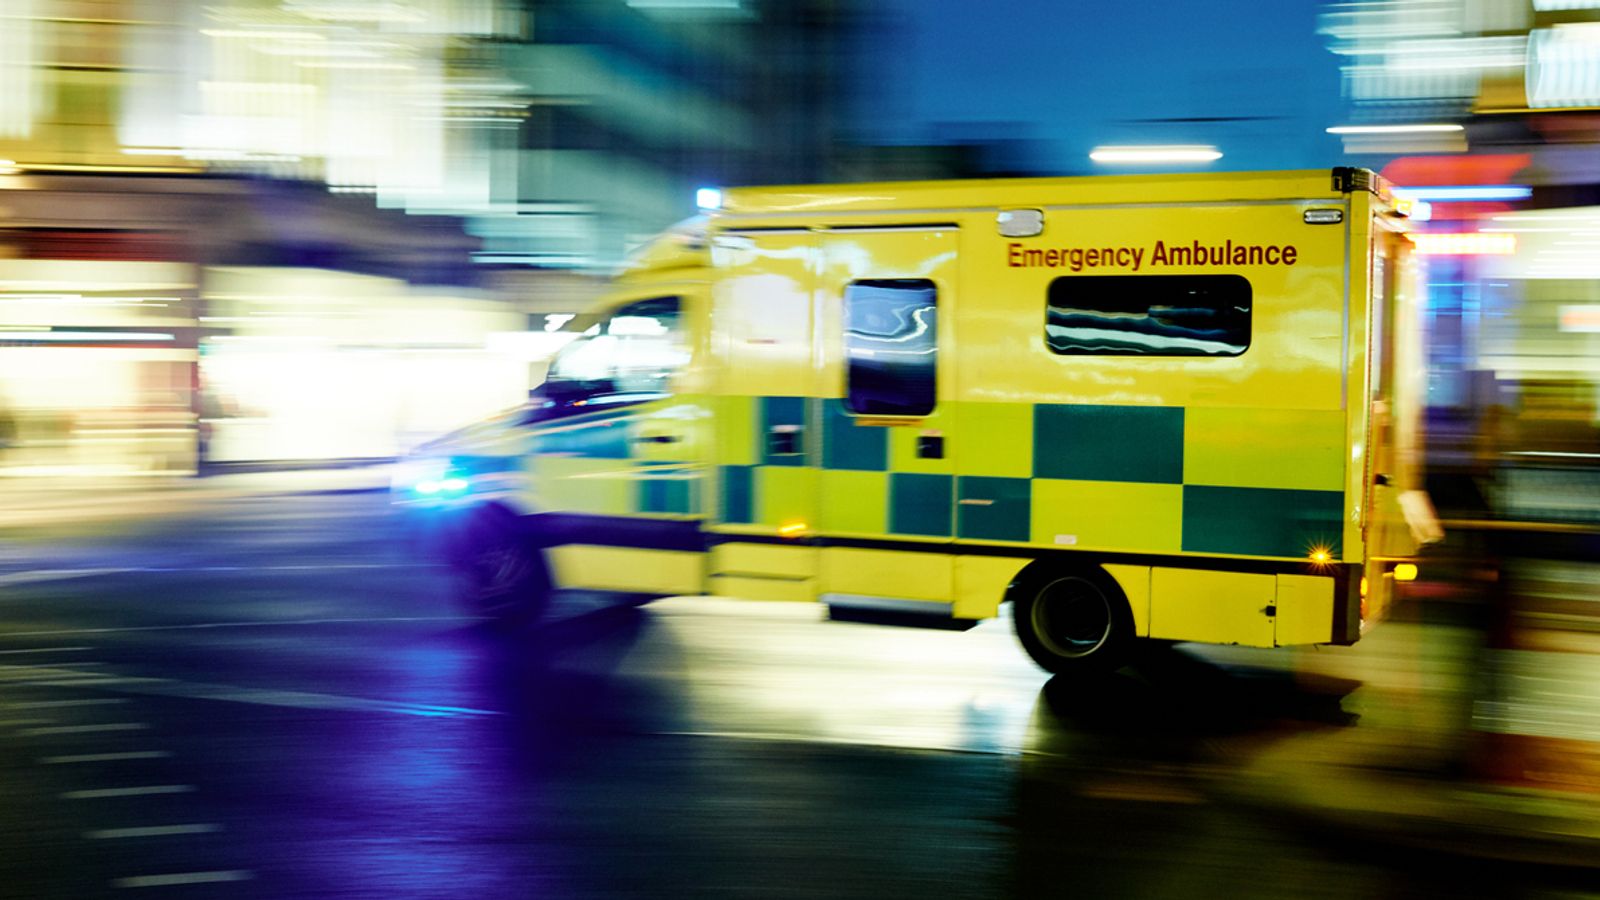 'Shocking waste': NHS is spending £1m a week on private ambulances for emergencies, union says 